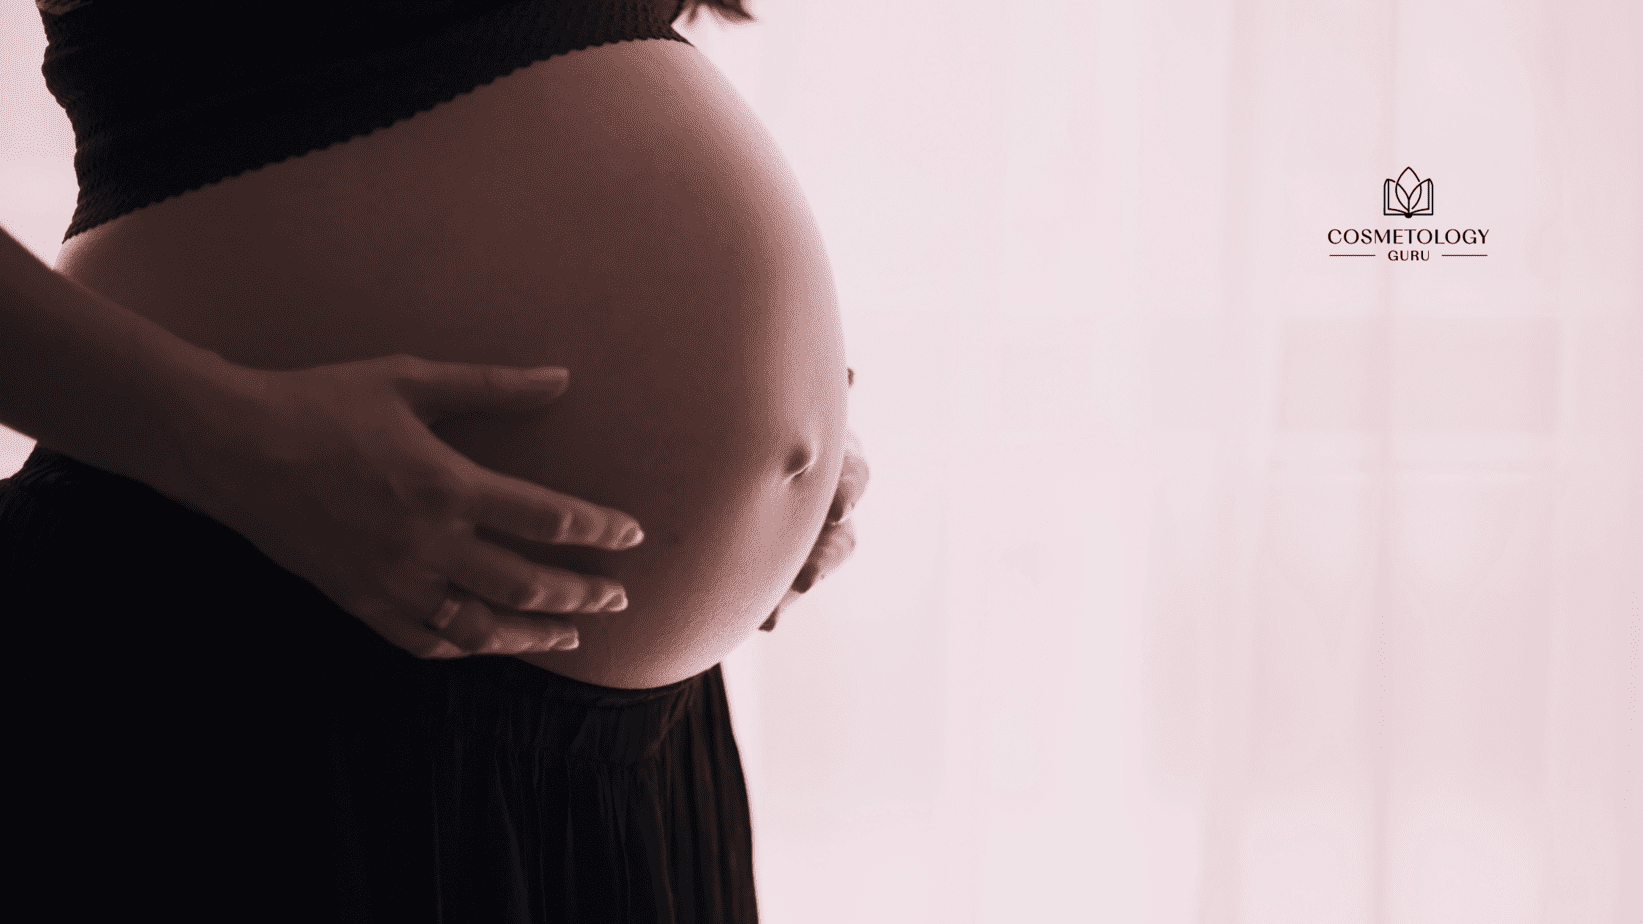 Cosmetology when pregnant: What you need to know to stay safe